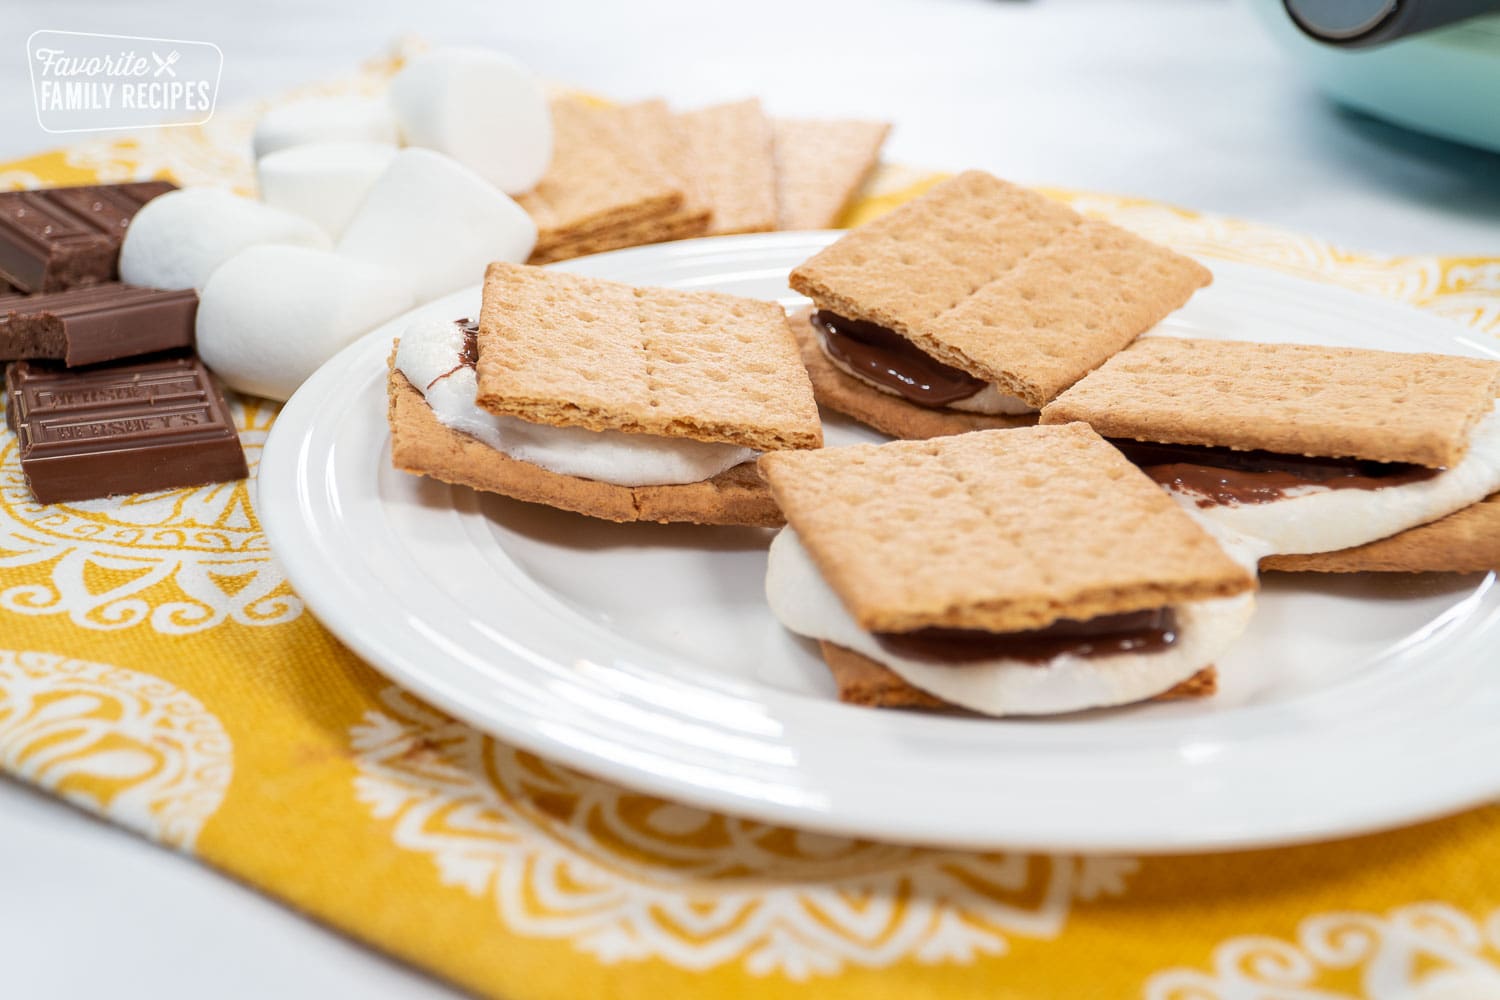 4 Smore's on a plate with an air fryer in the background